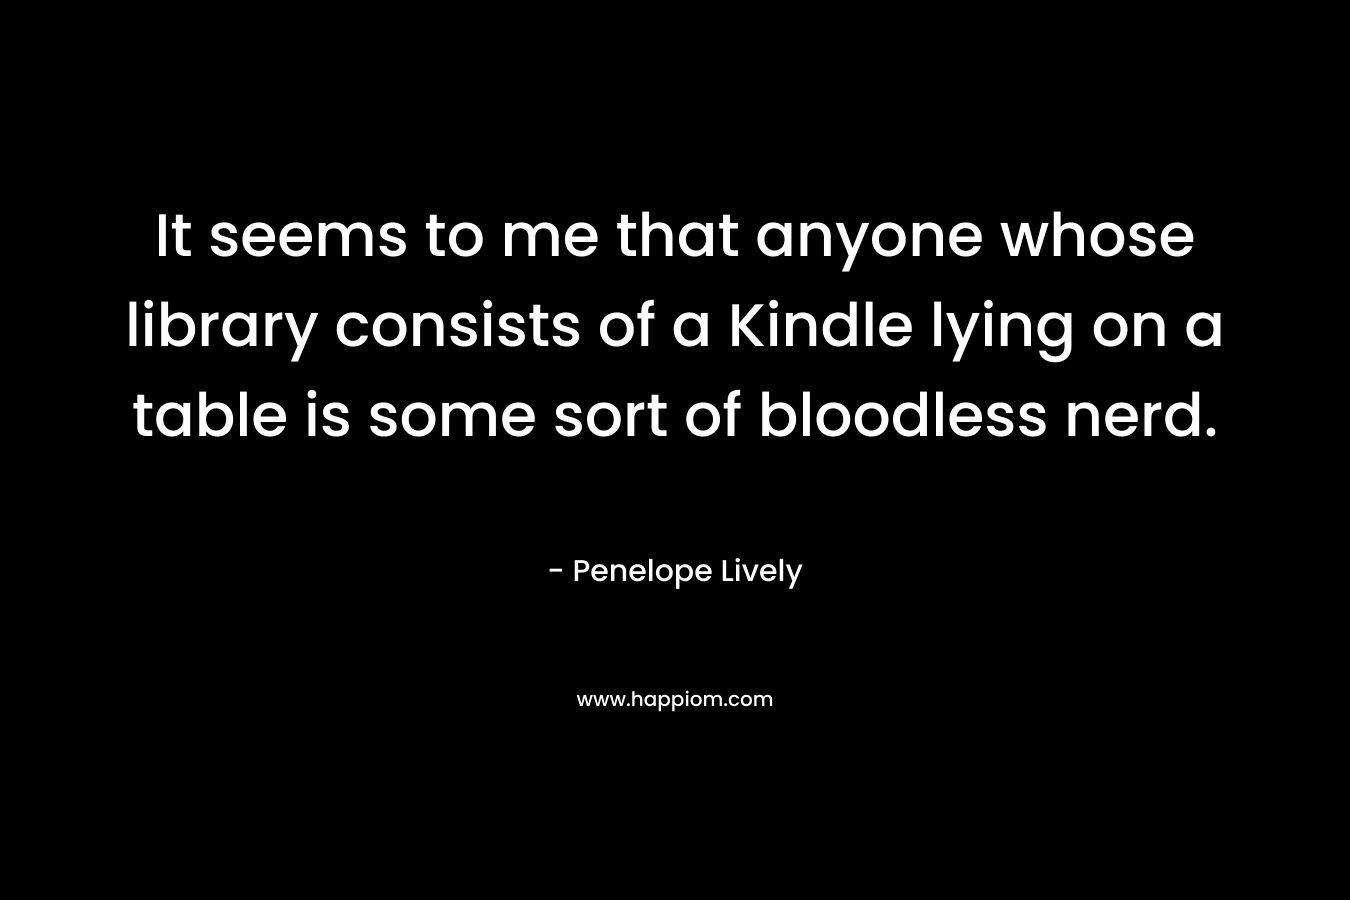 It seems to me that anyone whose library consists of a Kindle lying on a table is some sort of bloodless nerd. – Penelope Lively